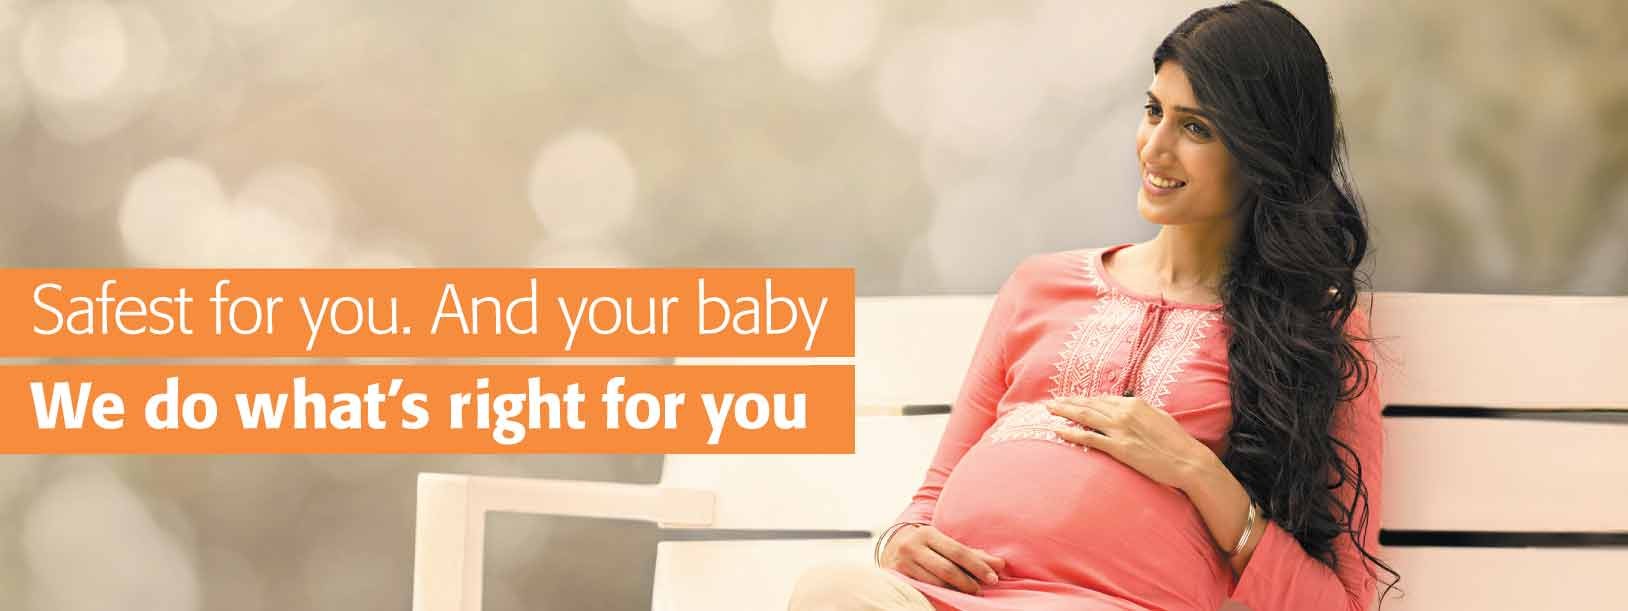 safest for you. And your baby. We do what's right for you